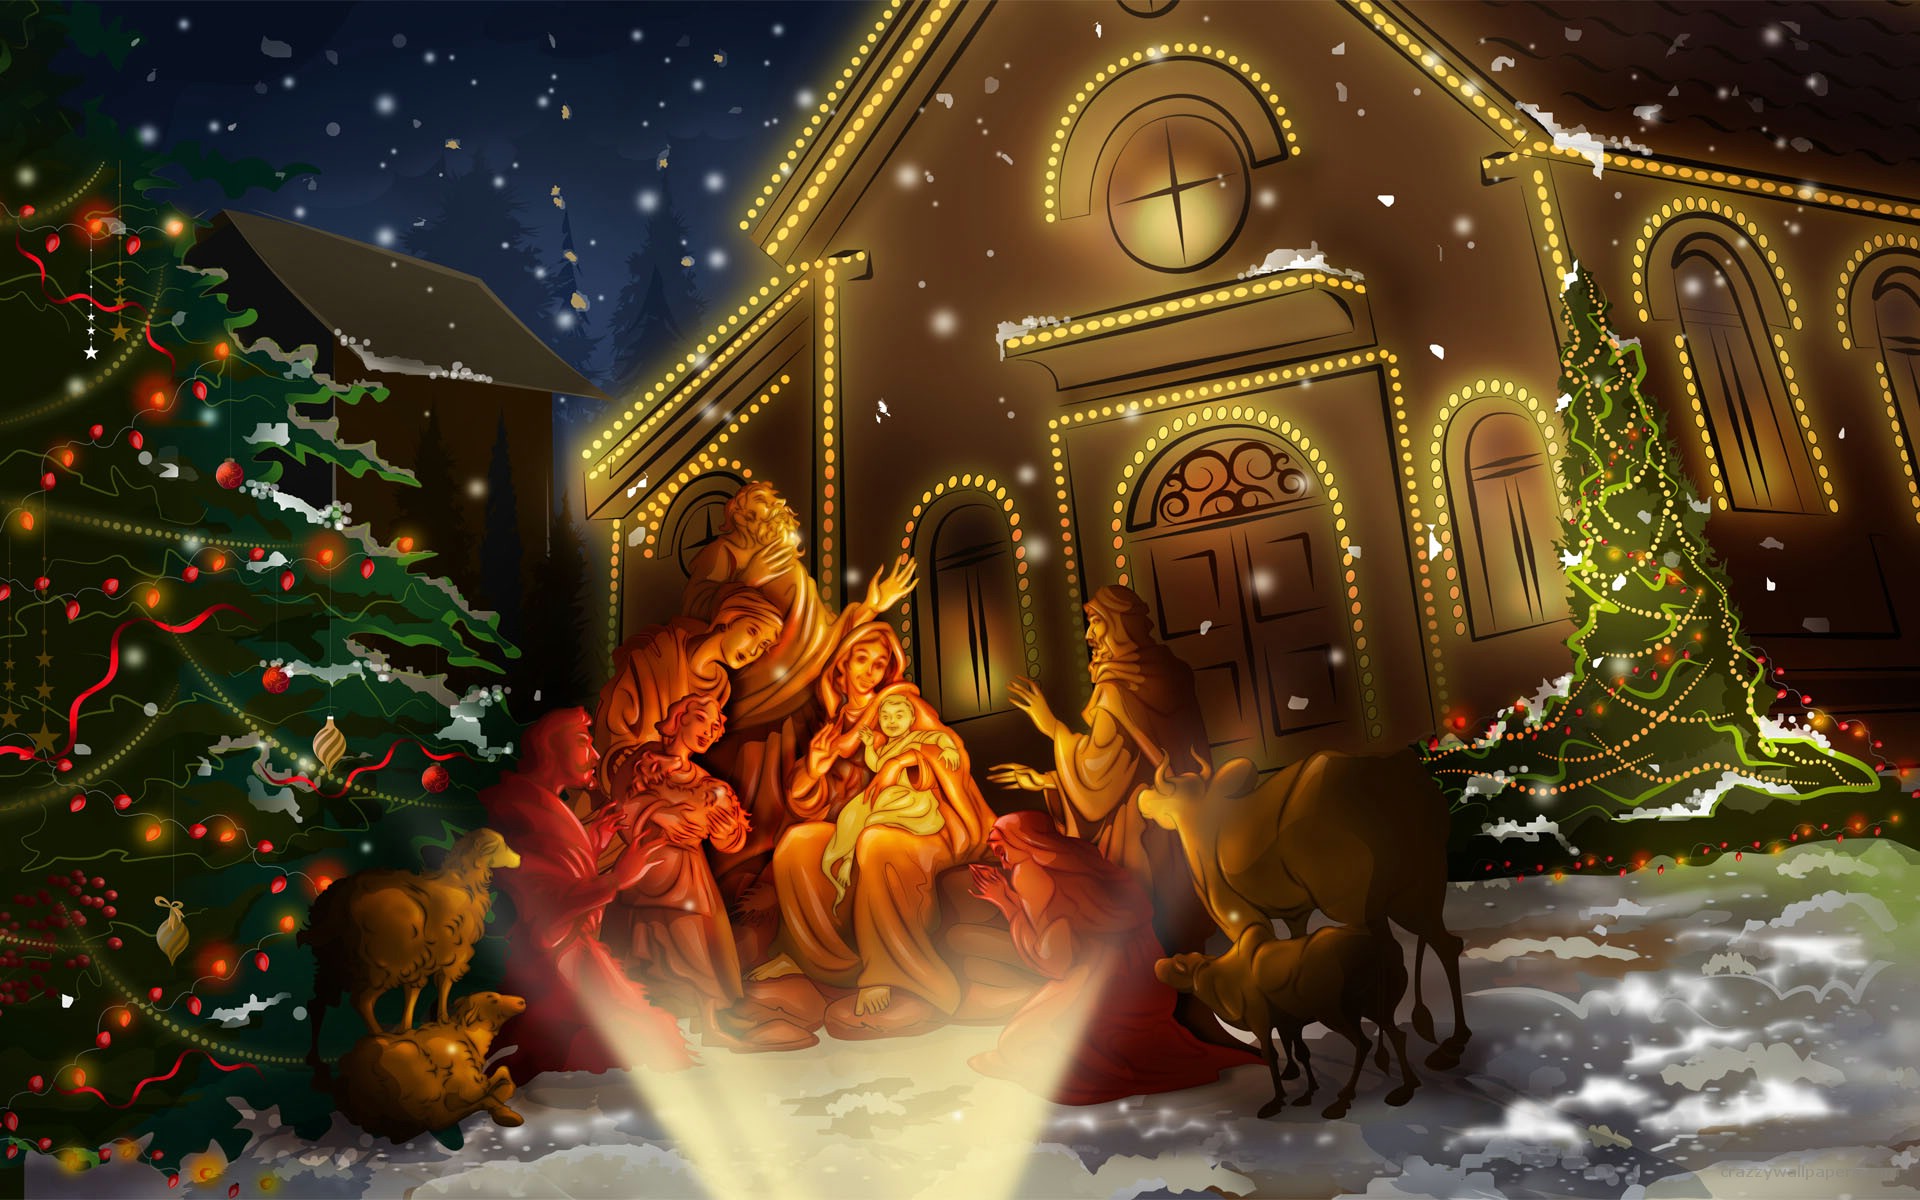 Beautiful Desktop Wallpapers 3d Christmas   ImgHD Browse and 1920x1200